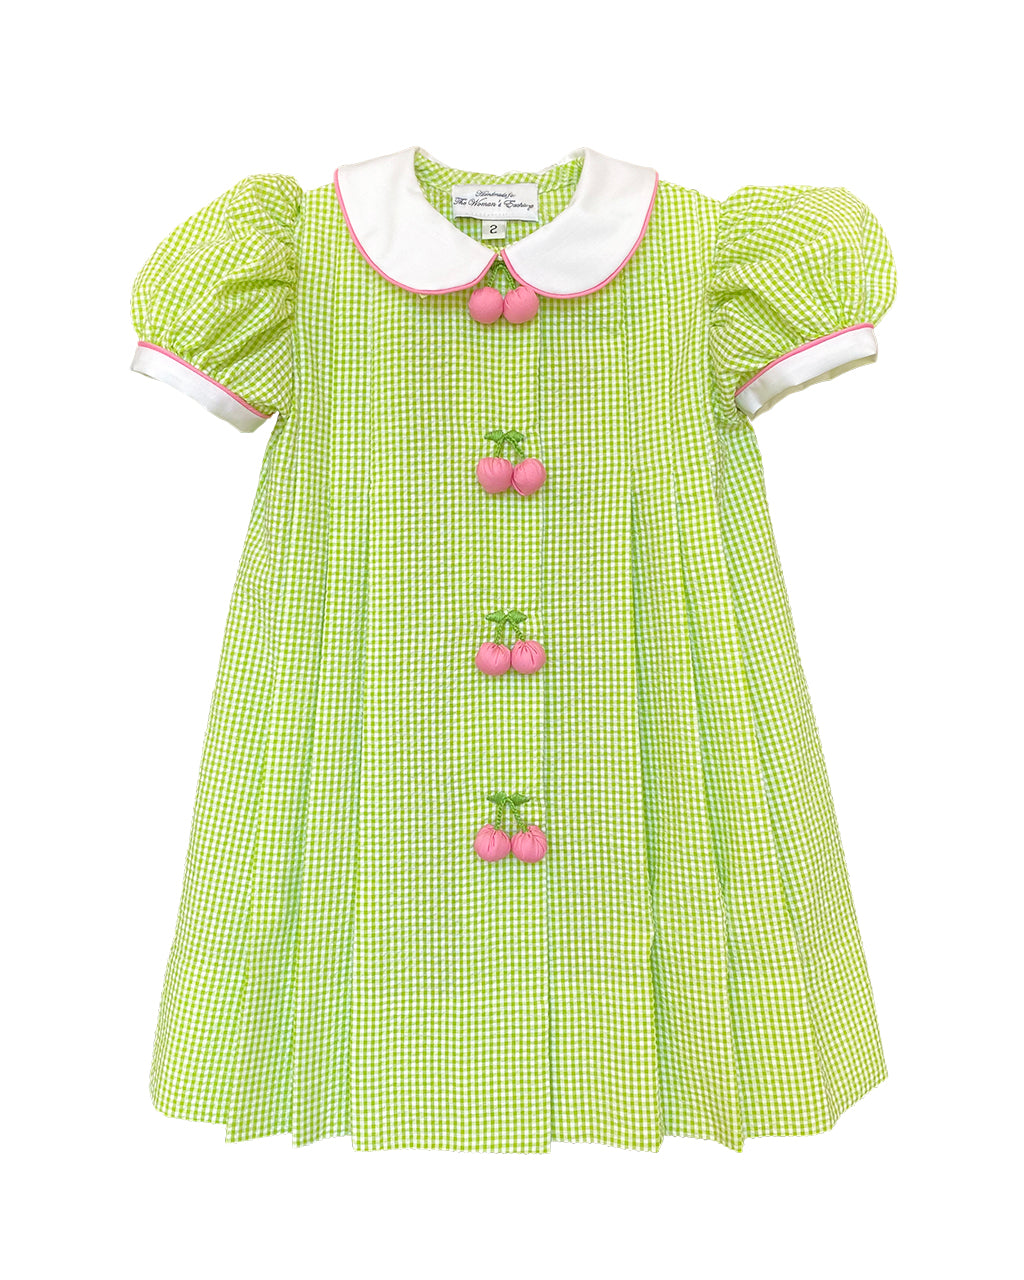 Cherry Dress in Lime Gingham